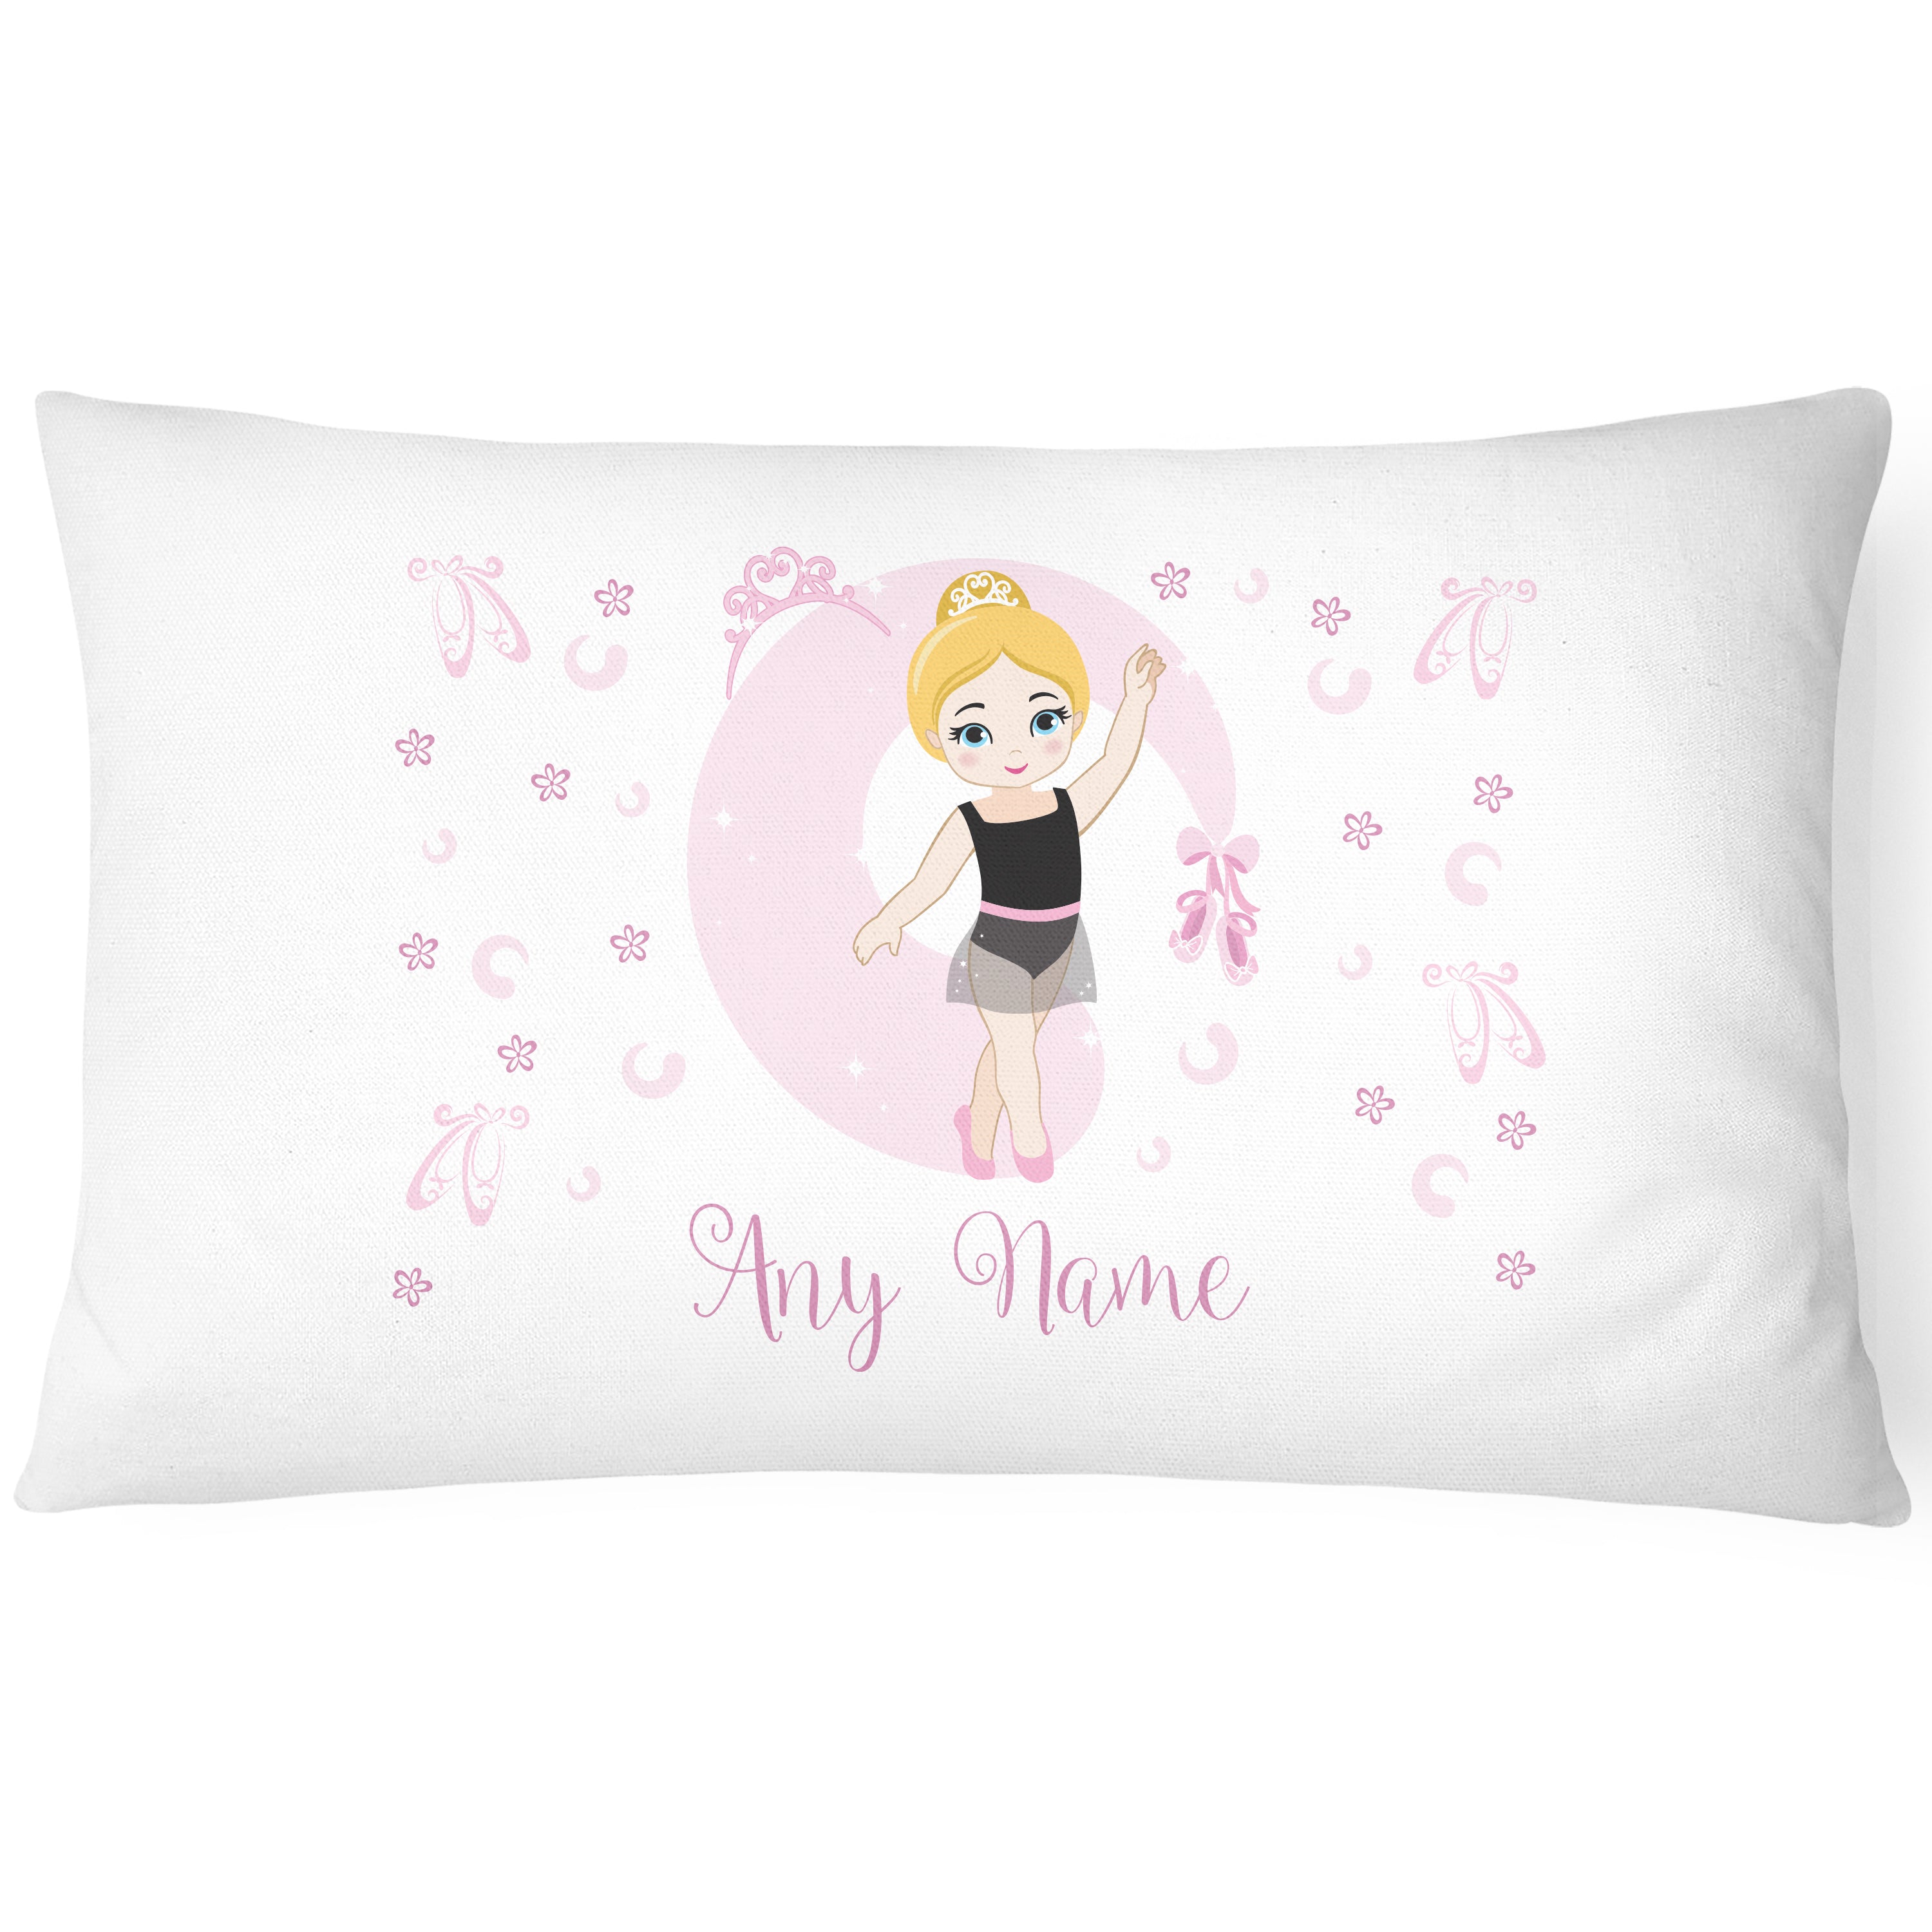 Ballerina Children's Pillowcase - Personalise with Any Name Cute